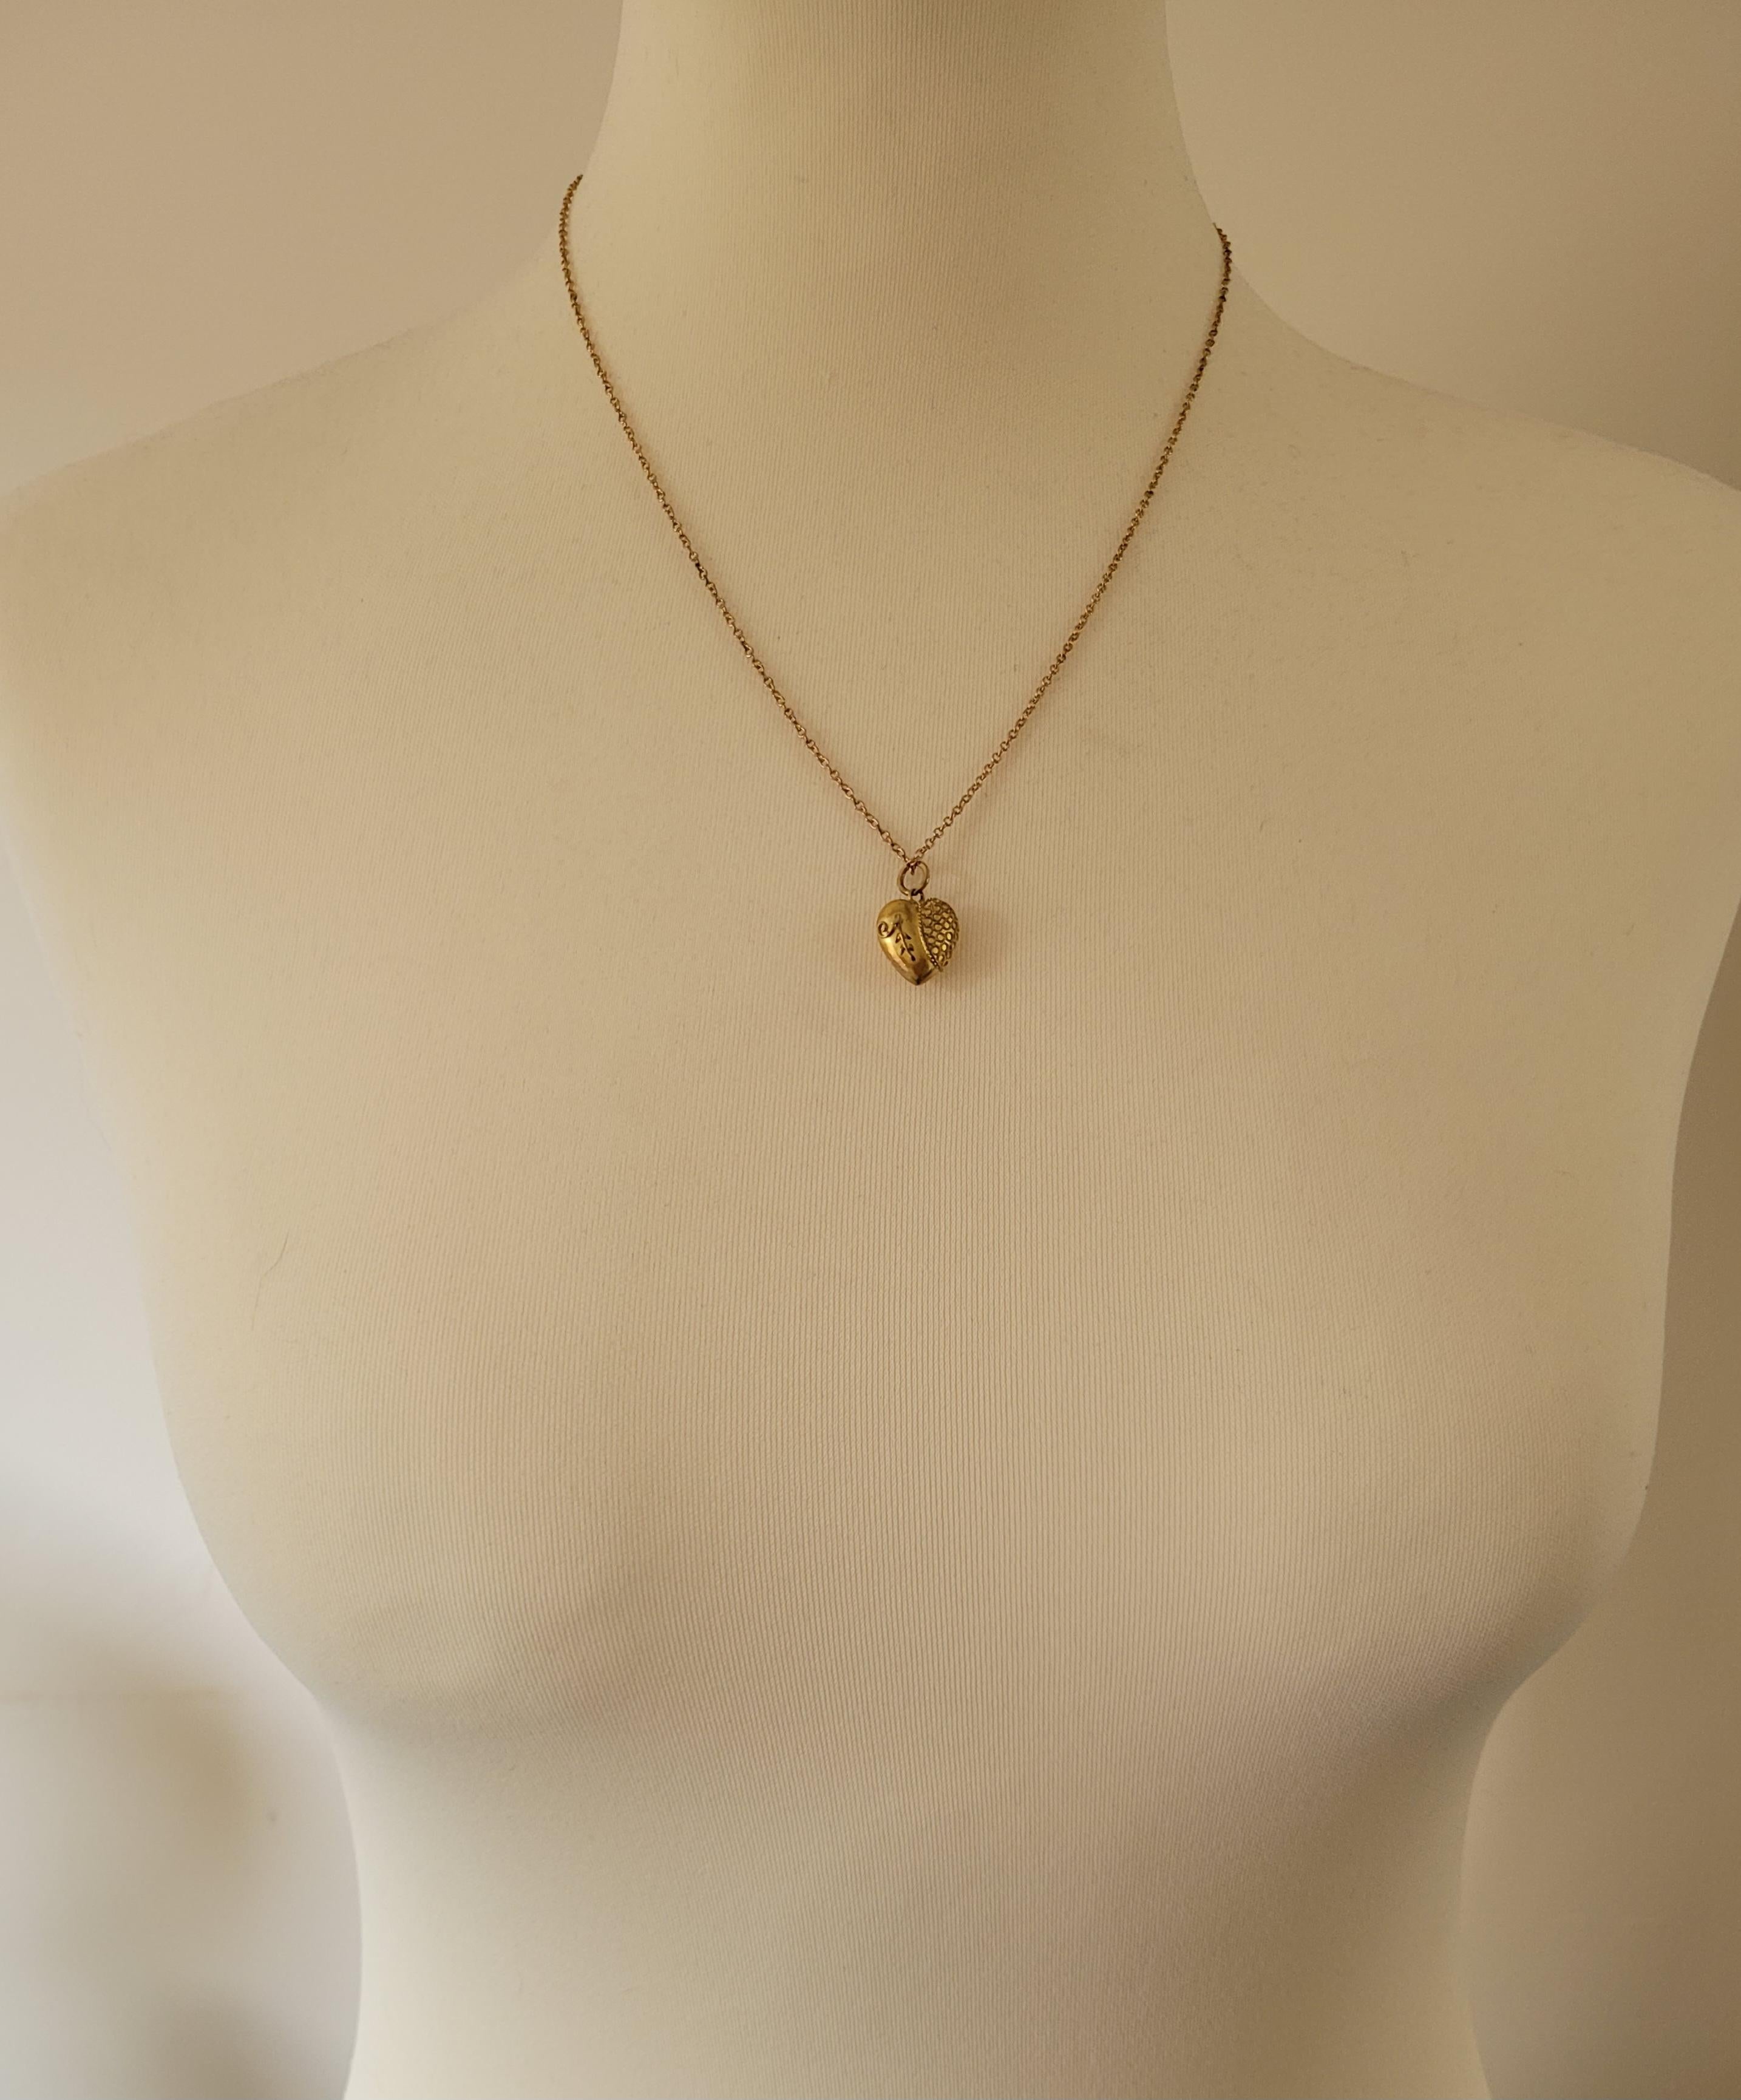 Victorian Gold puffy heart pendant necklace For Sale 3